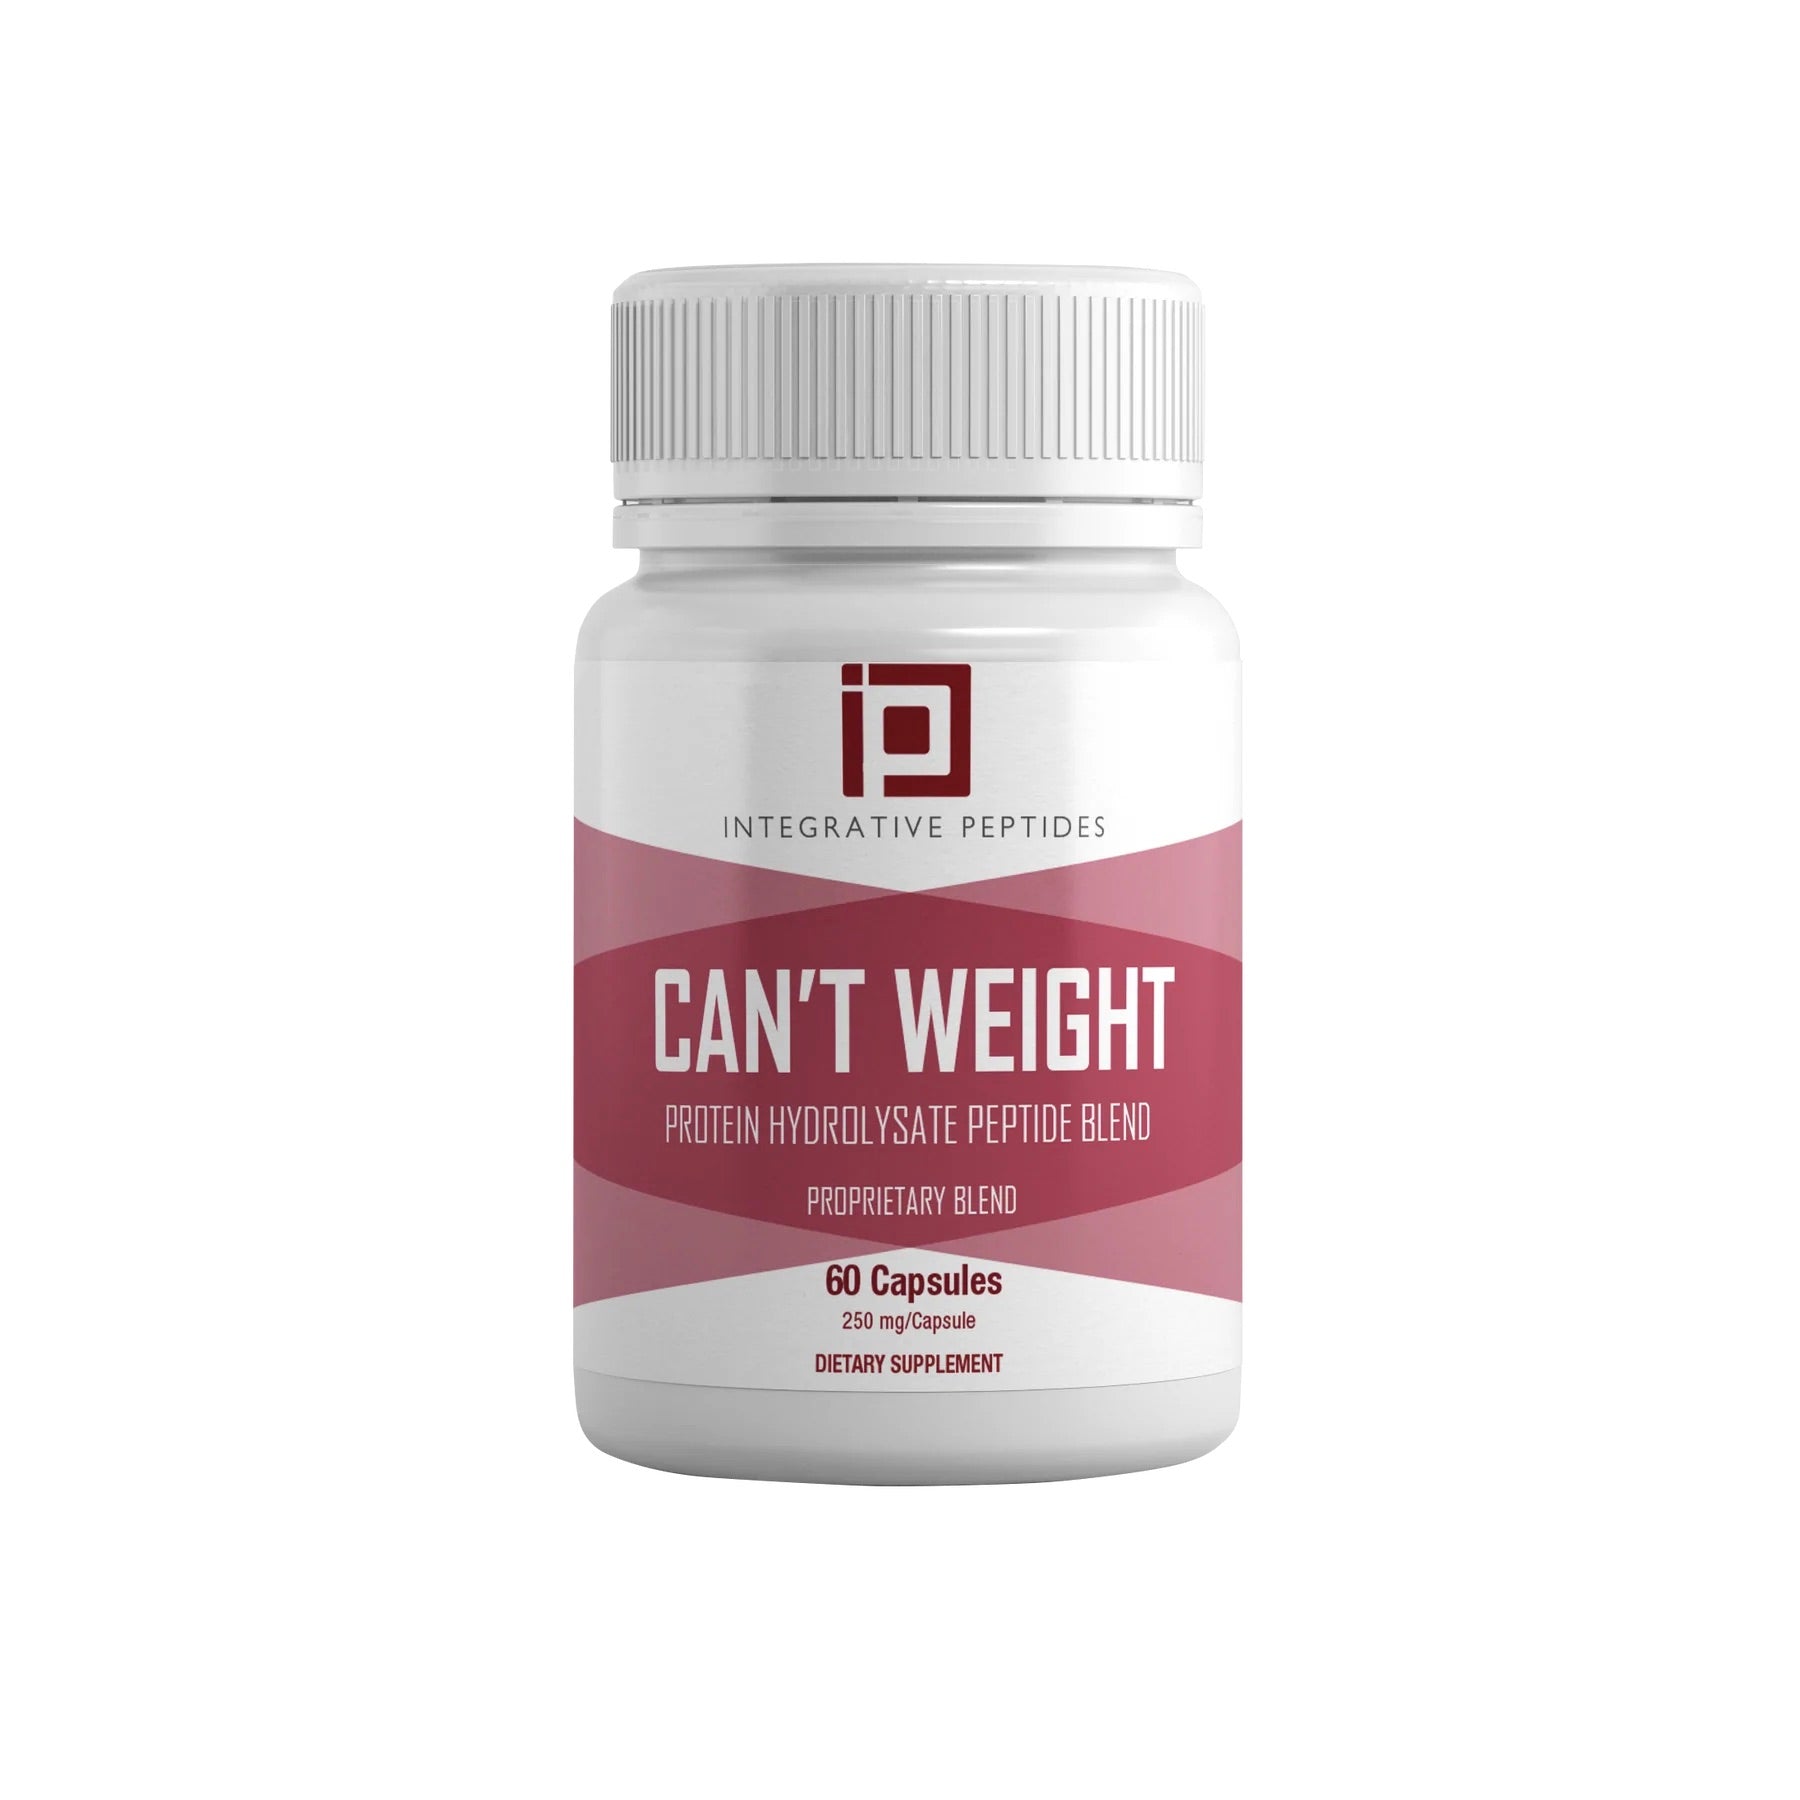 Integrative Peptides - Can't Weight  - 60 Capsules - ePothex